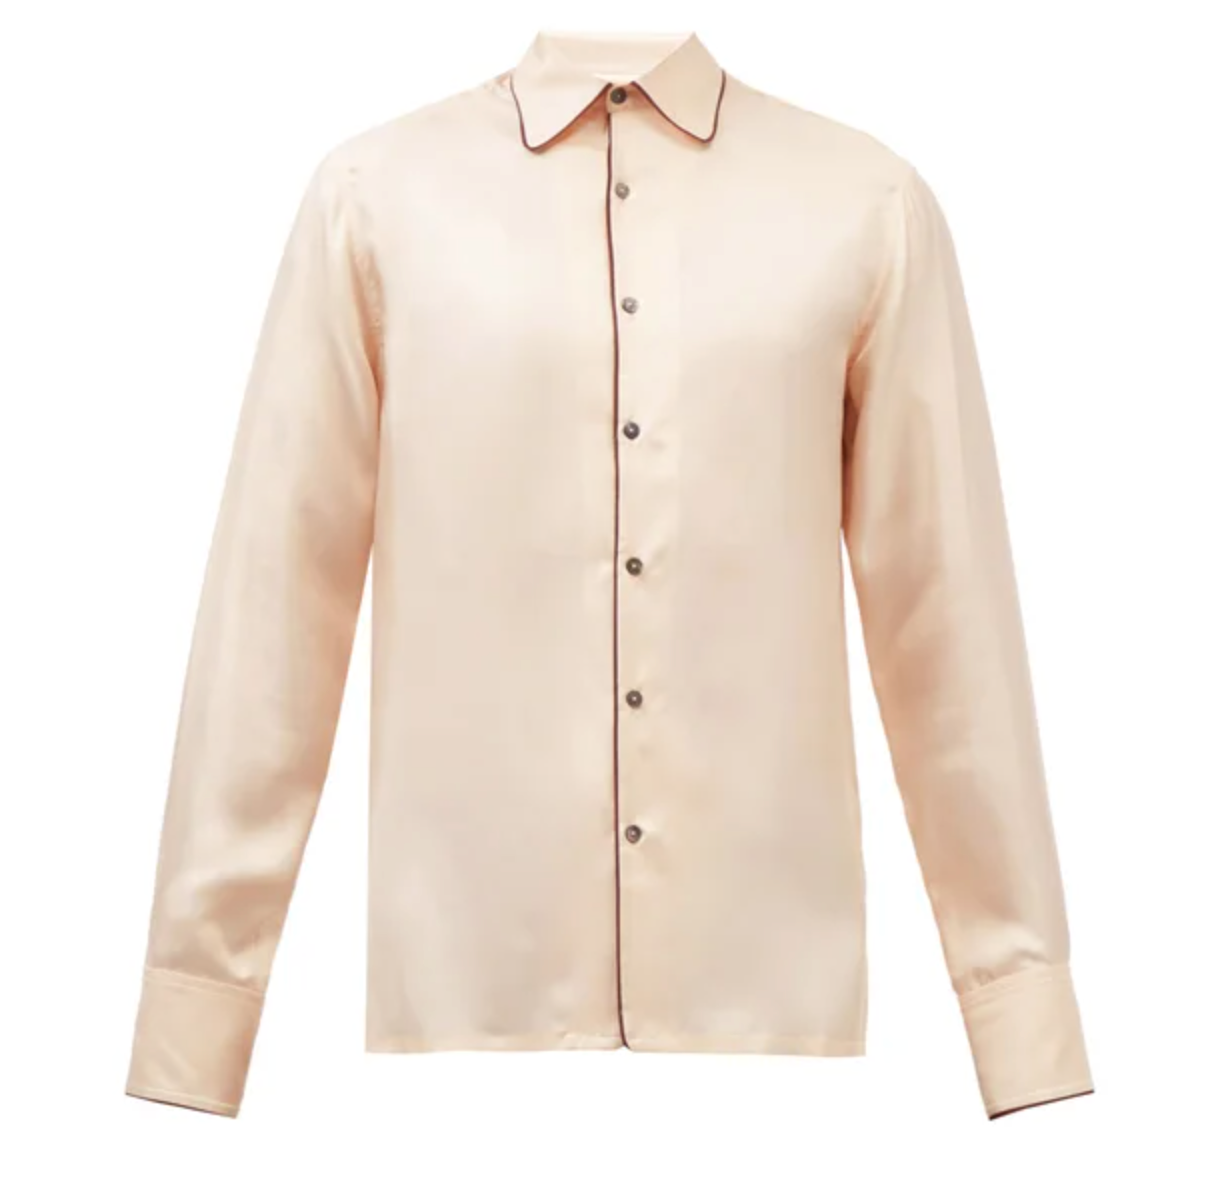 A masculine piped trim silk satin shirt from 73 London